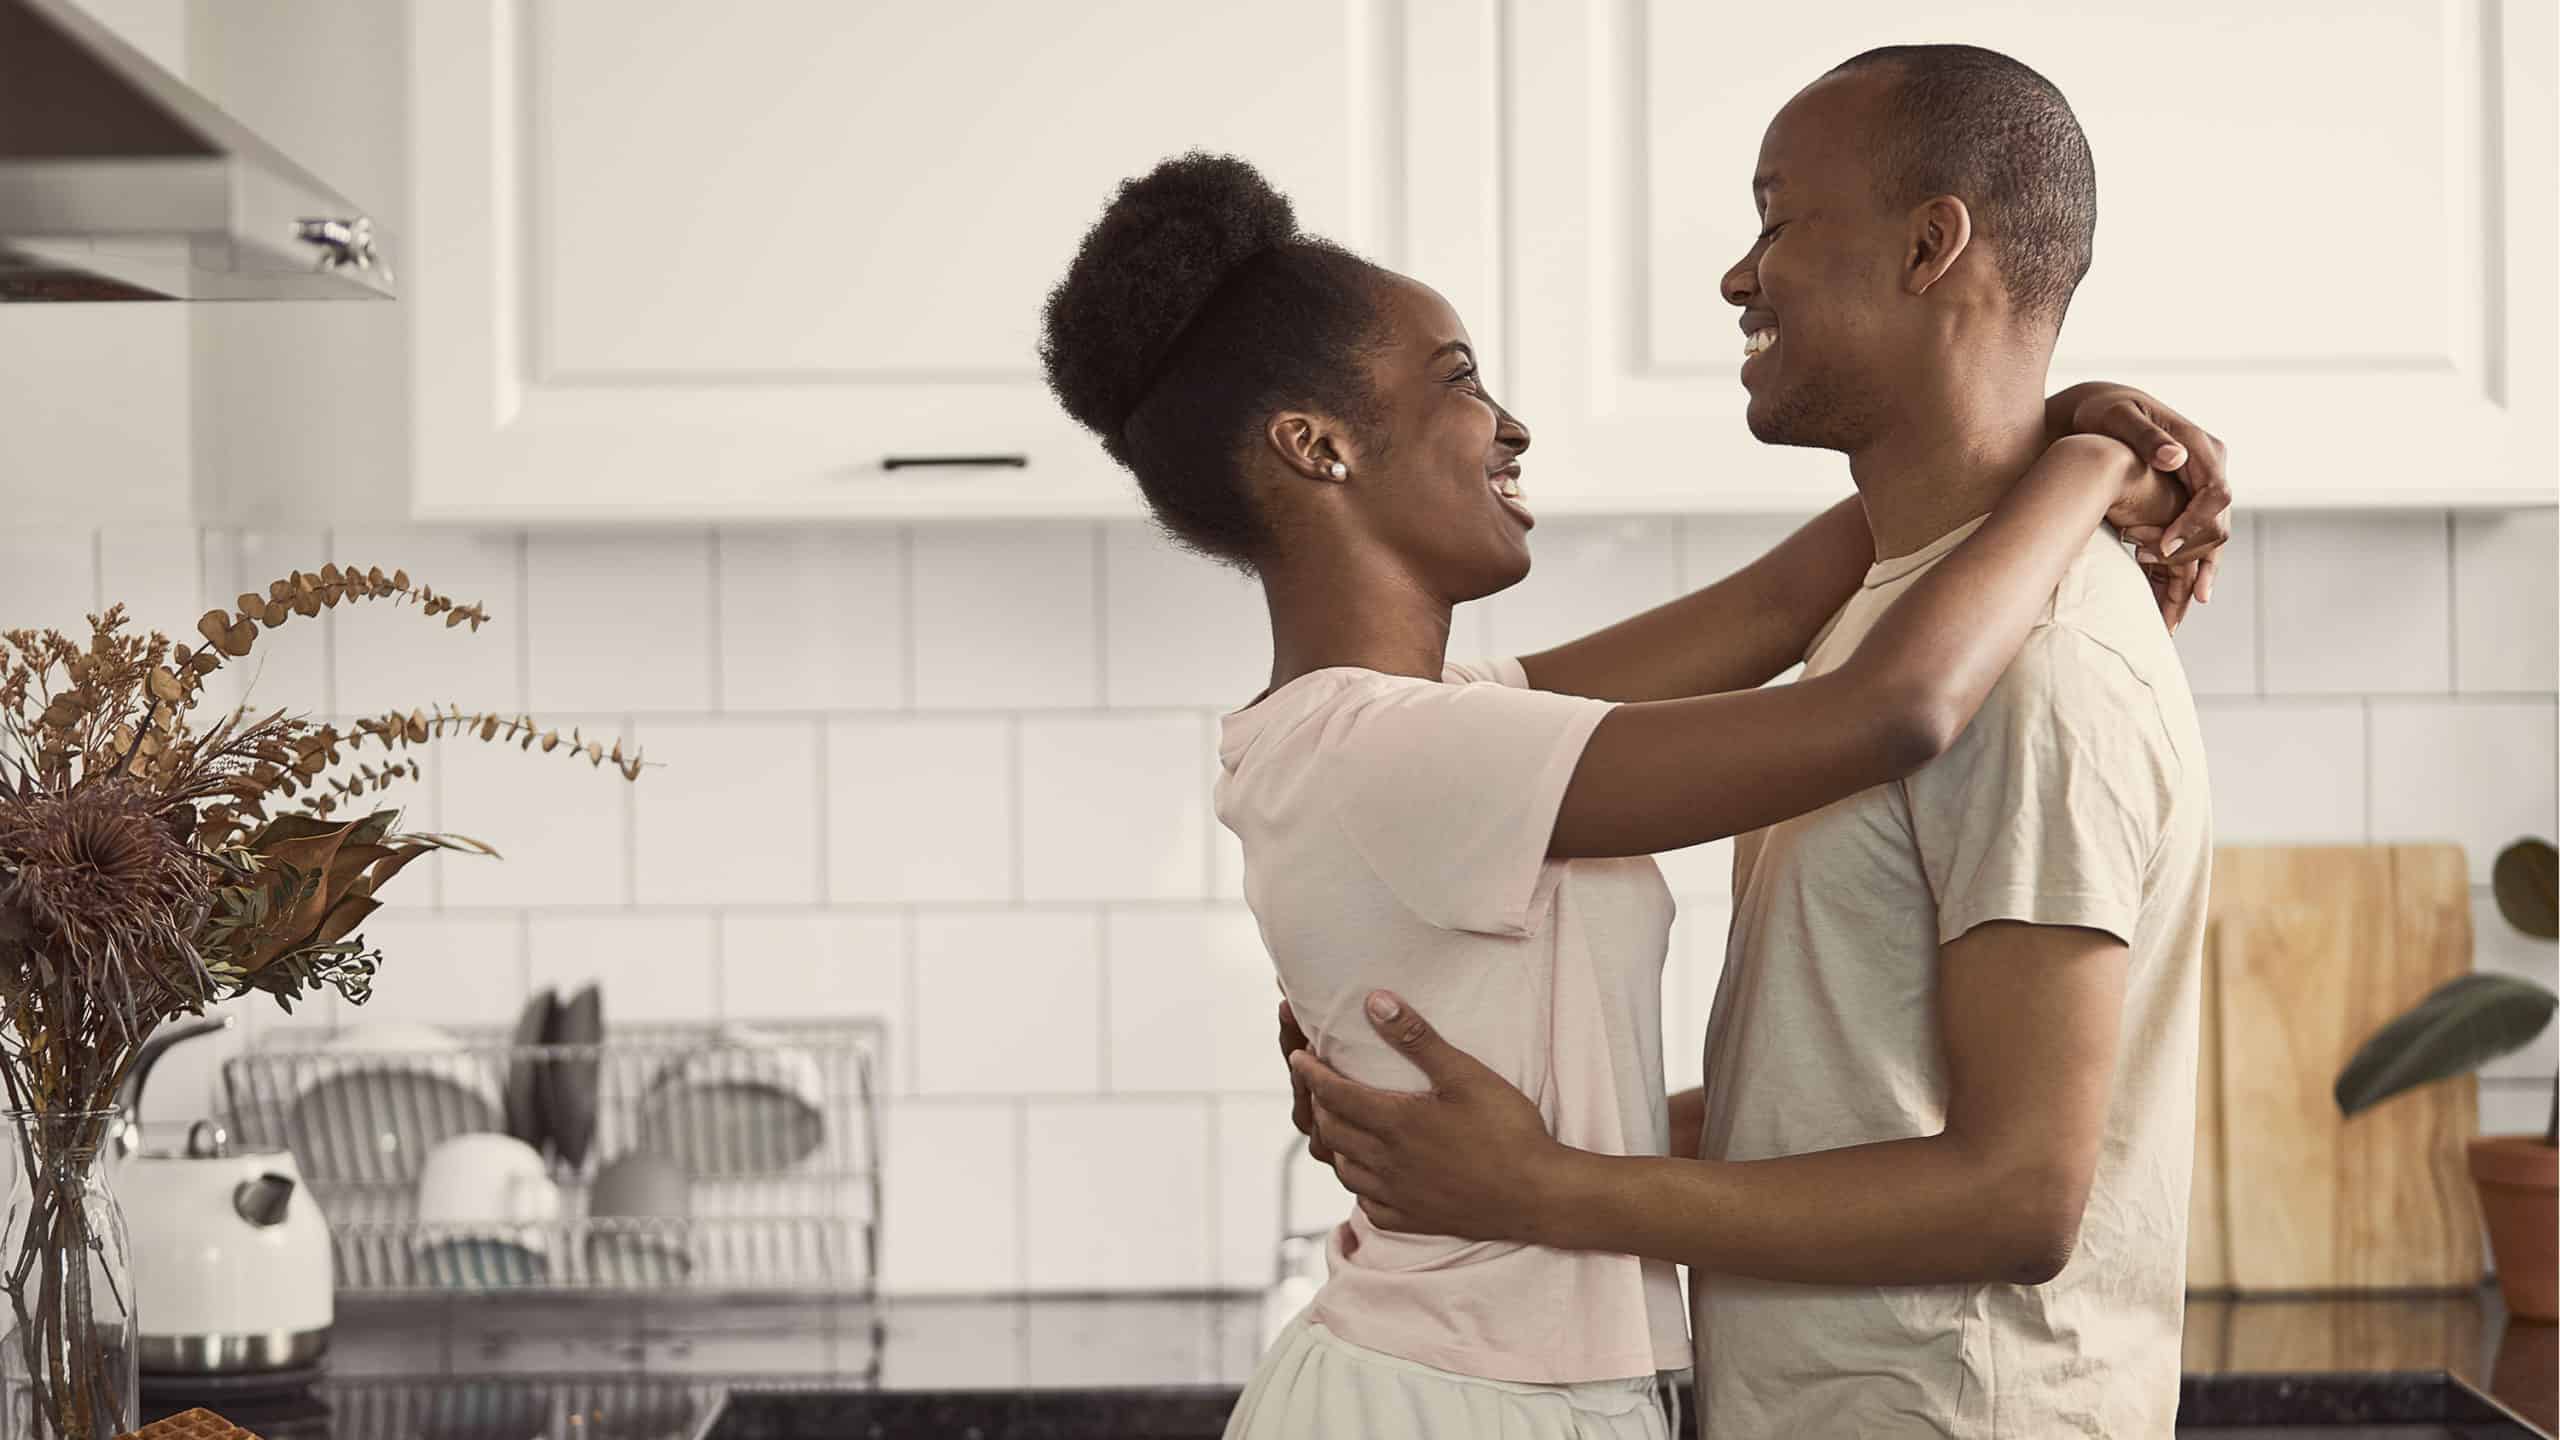 a man and woman dance together in a kitchen.